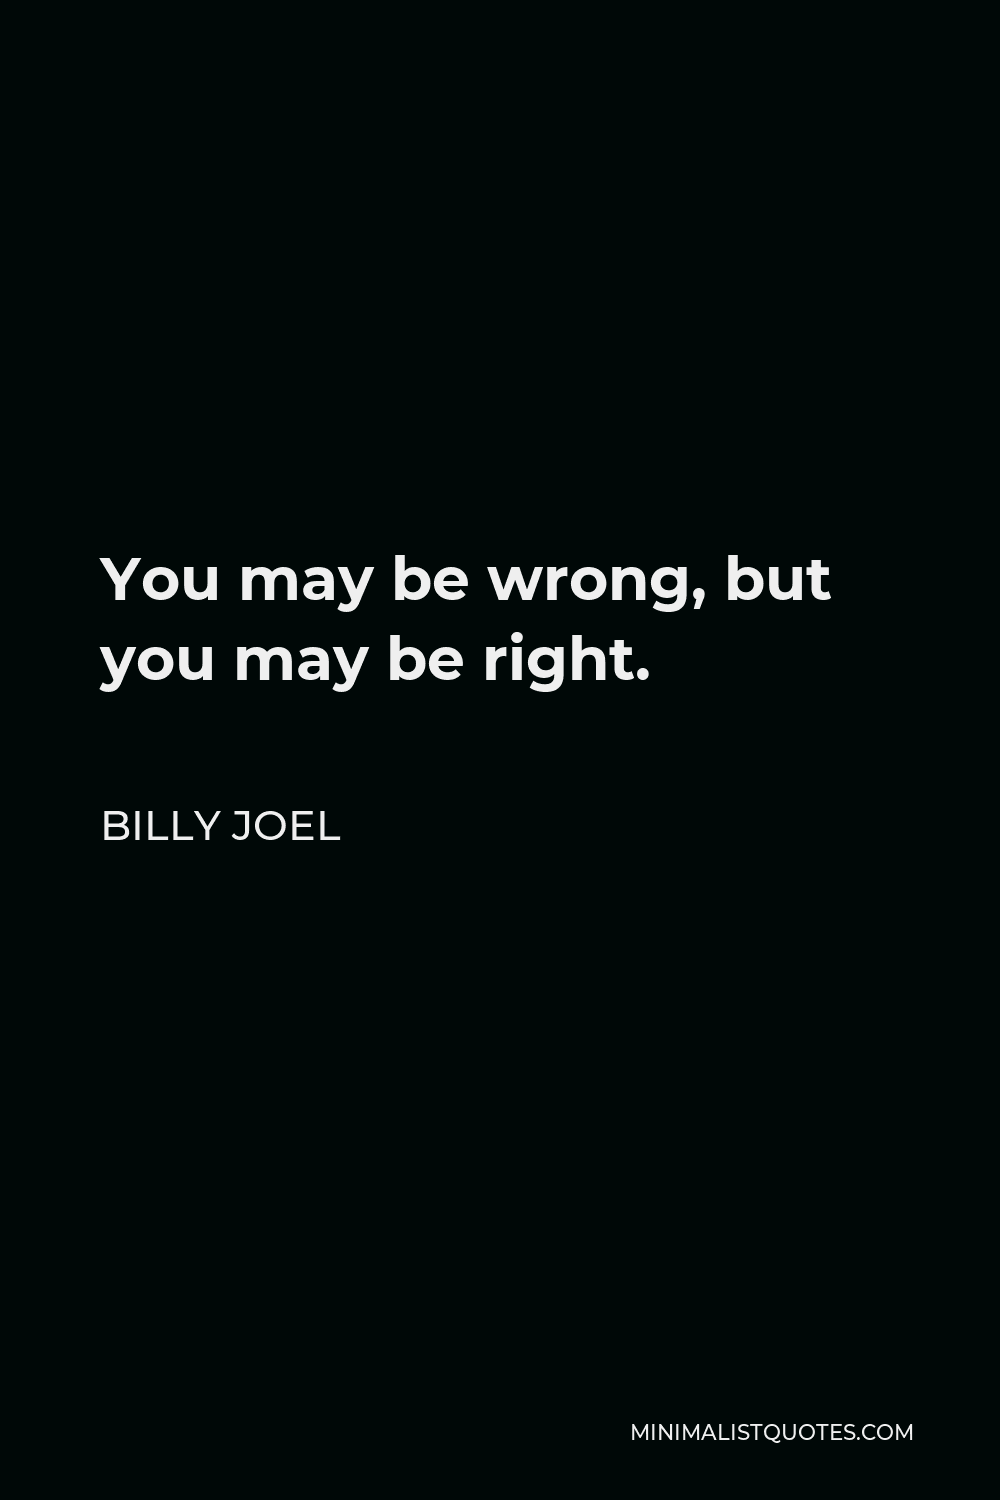 Billy Joel Quote - You may be wrong, but you may be right.